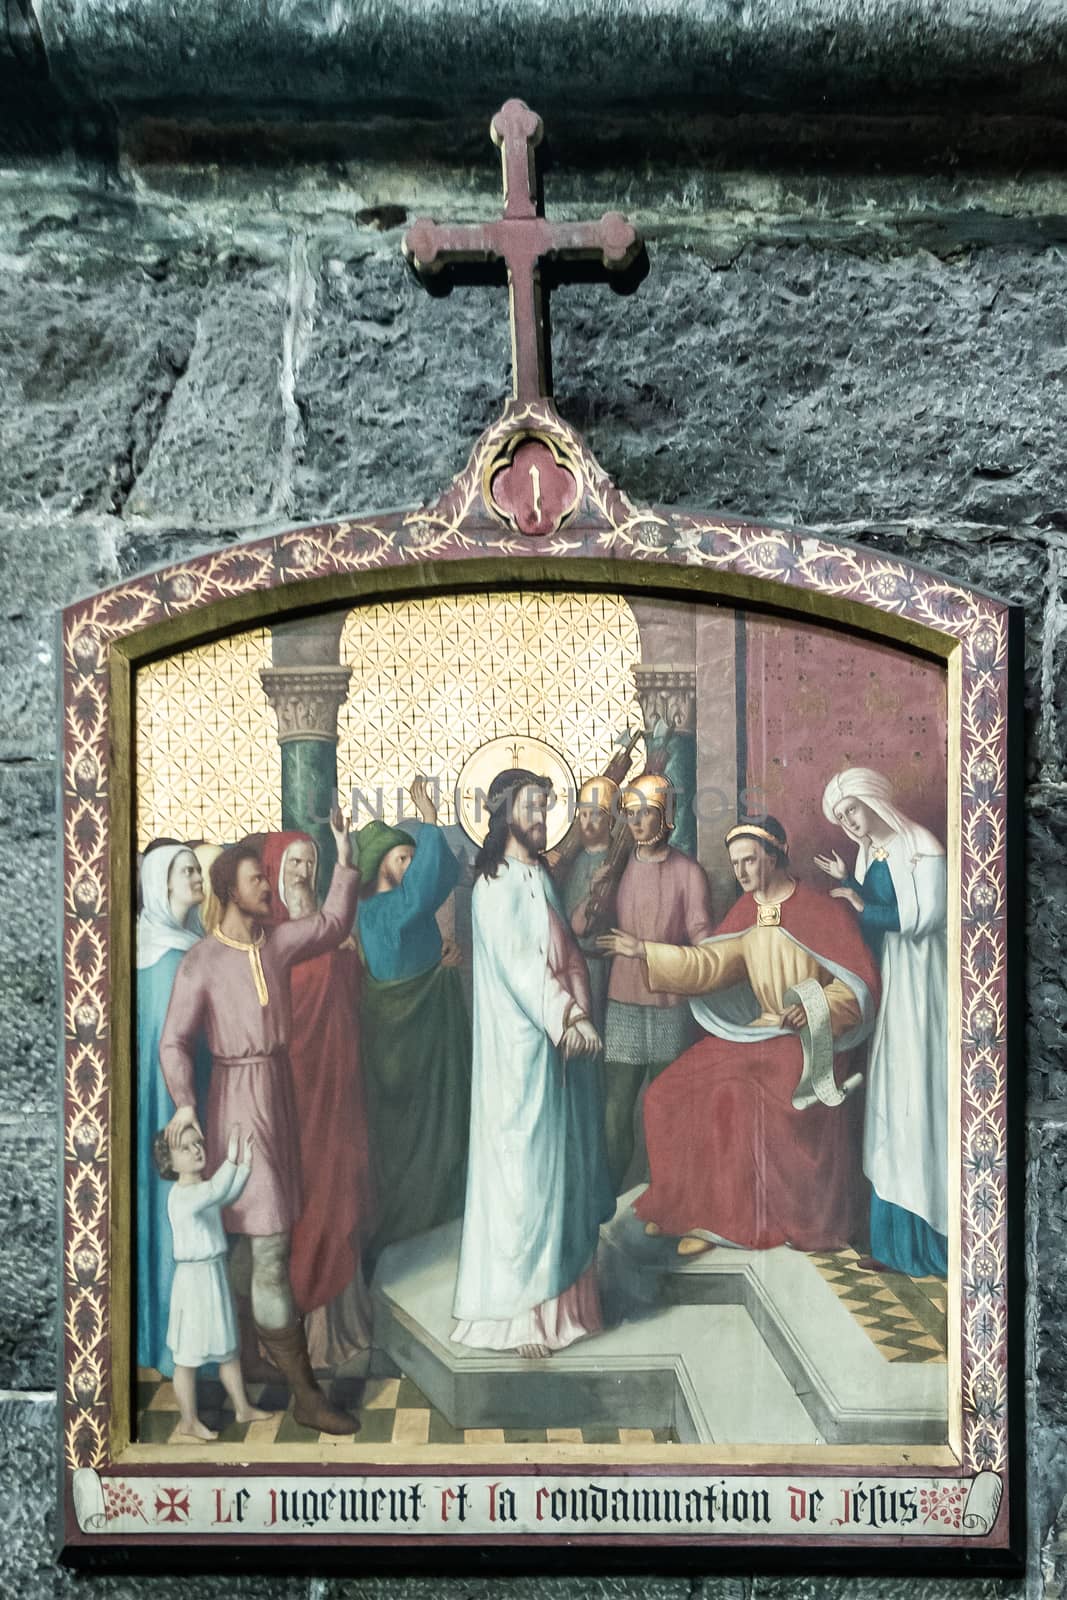 Dinant, Belgium - June 26, 2019: Inside Collégiale Notre Dame de Dinant Church. Closeup of first station of the cross painting featuring judgment and condemnation of Jesus.